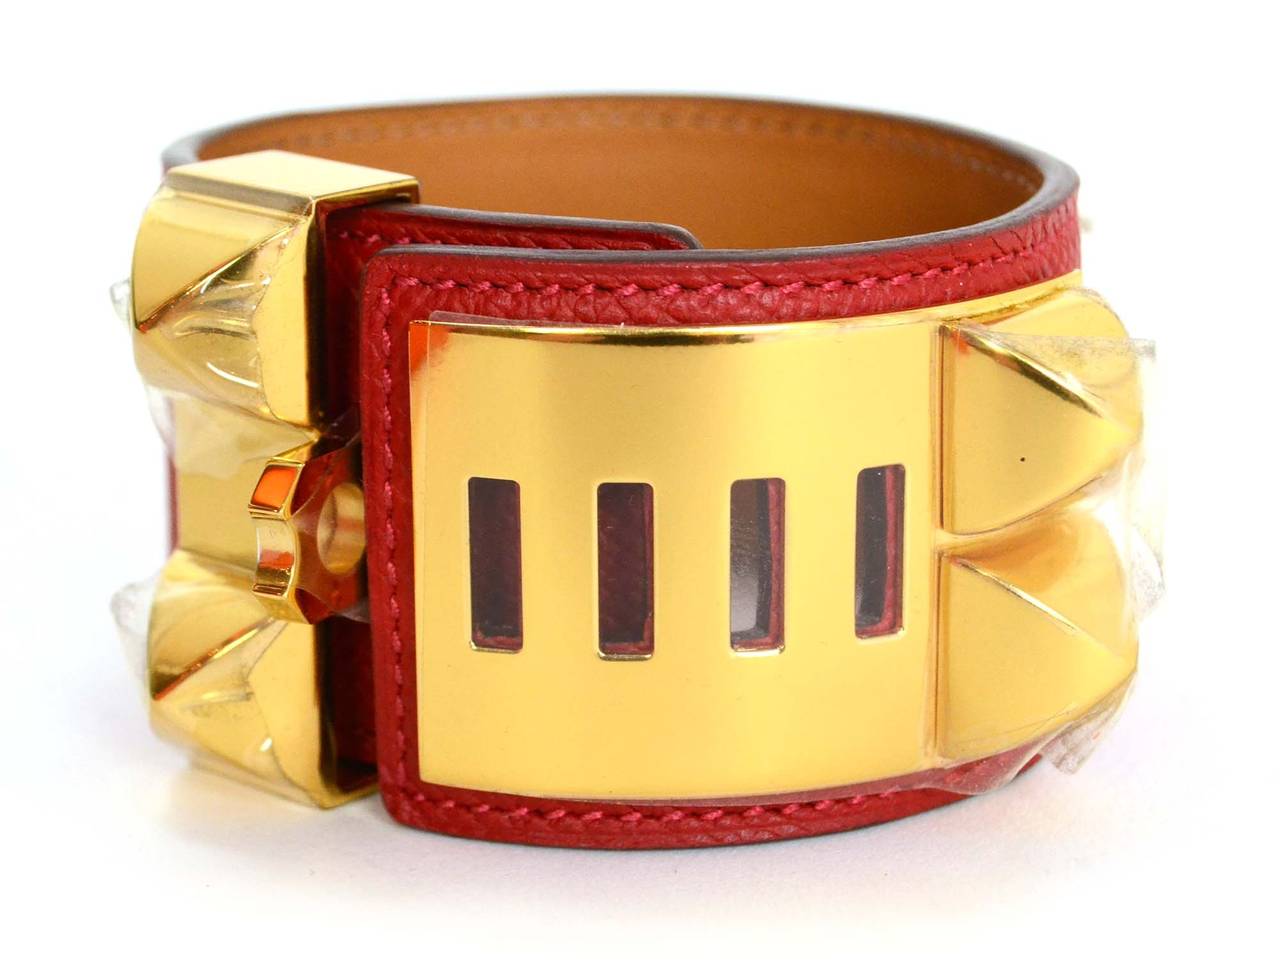 Hermes Rouge Casaque Red Epsom CDC Cuff
    Made in: France
    Year of Production: 2013
    Color: Red and goldtone
    Materials: Epsom leather and metal
    Closure/Opening: Four slots to accommodate different wrist sizes; size locks into